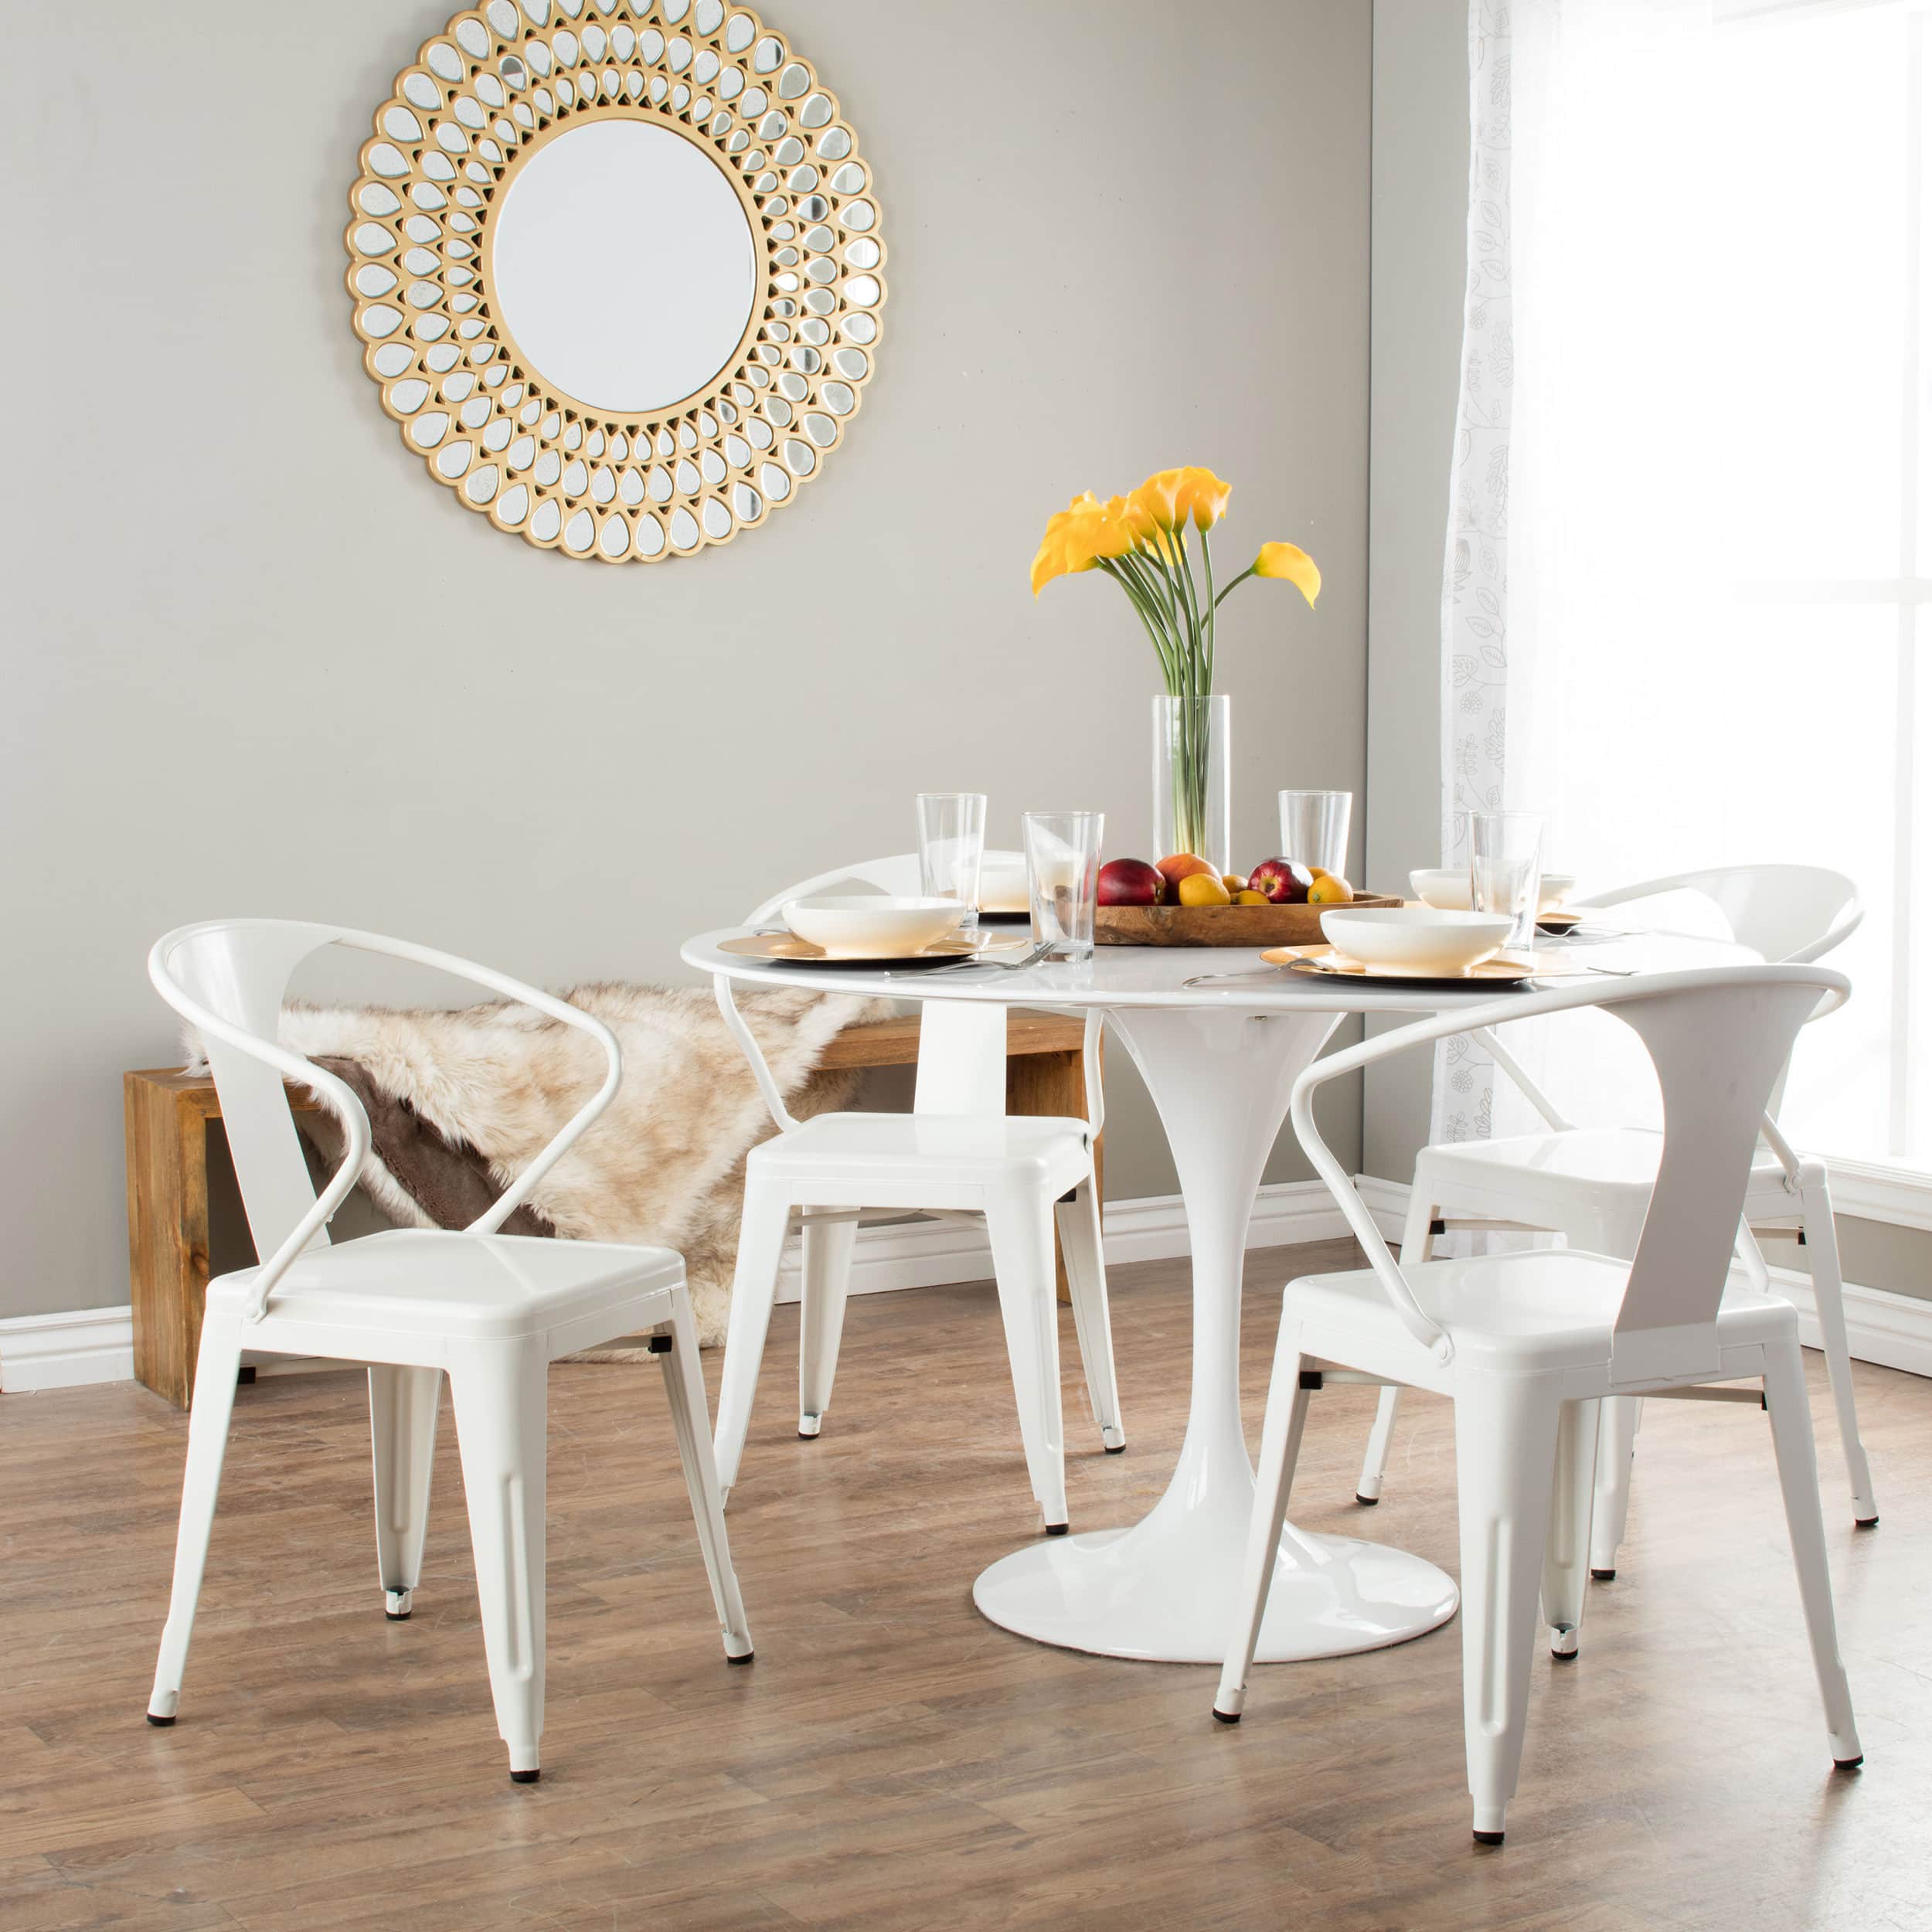 Buy Kitchen & Dining Room Chairs Online at Overstock.com | Our Best